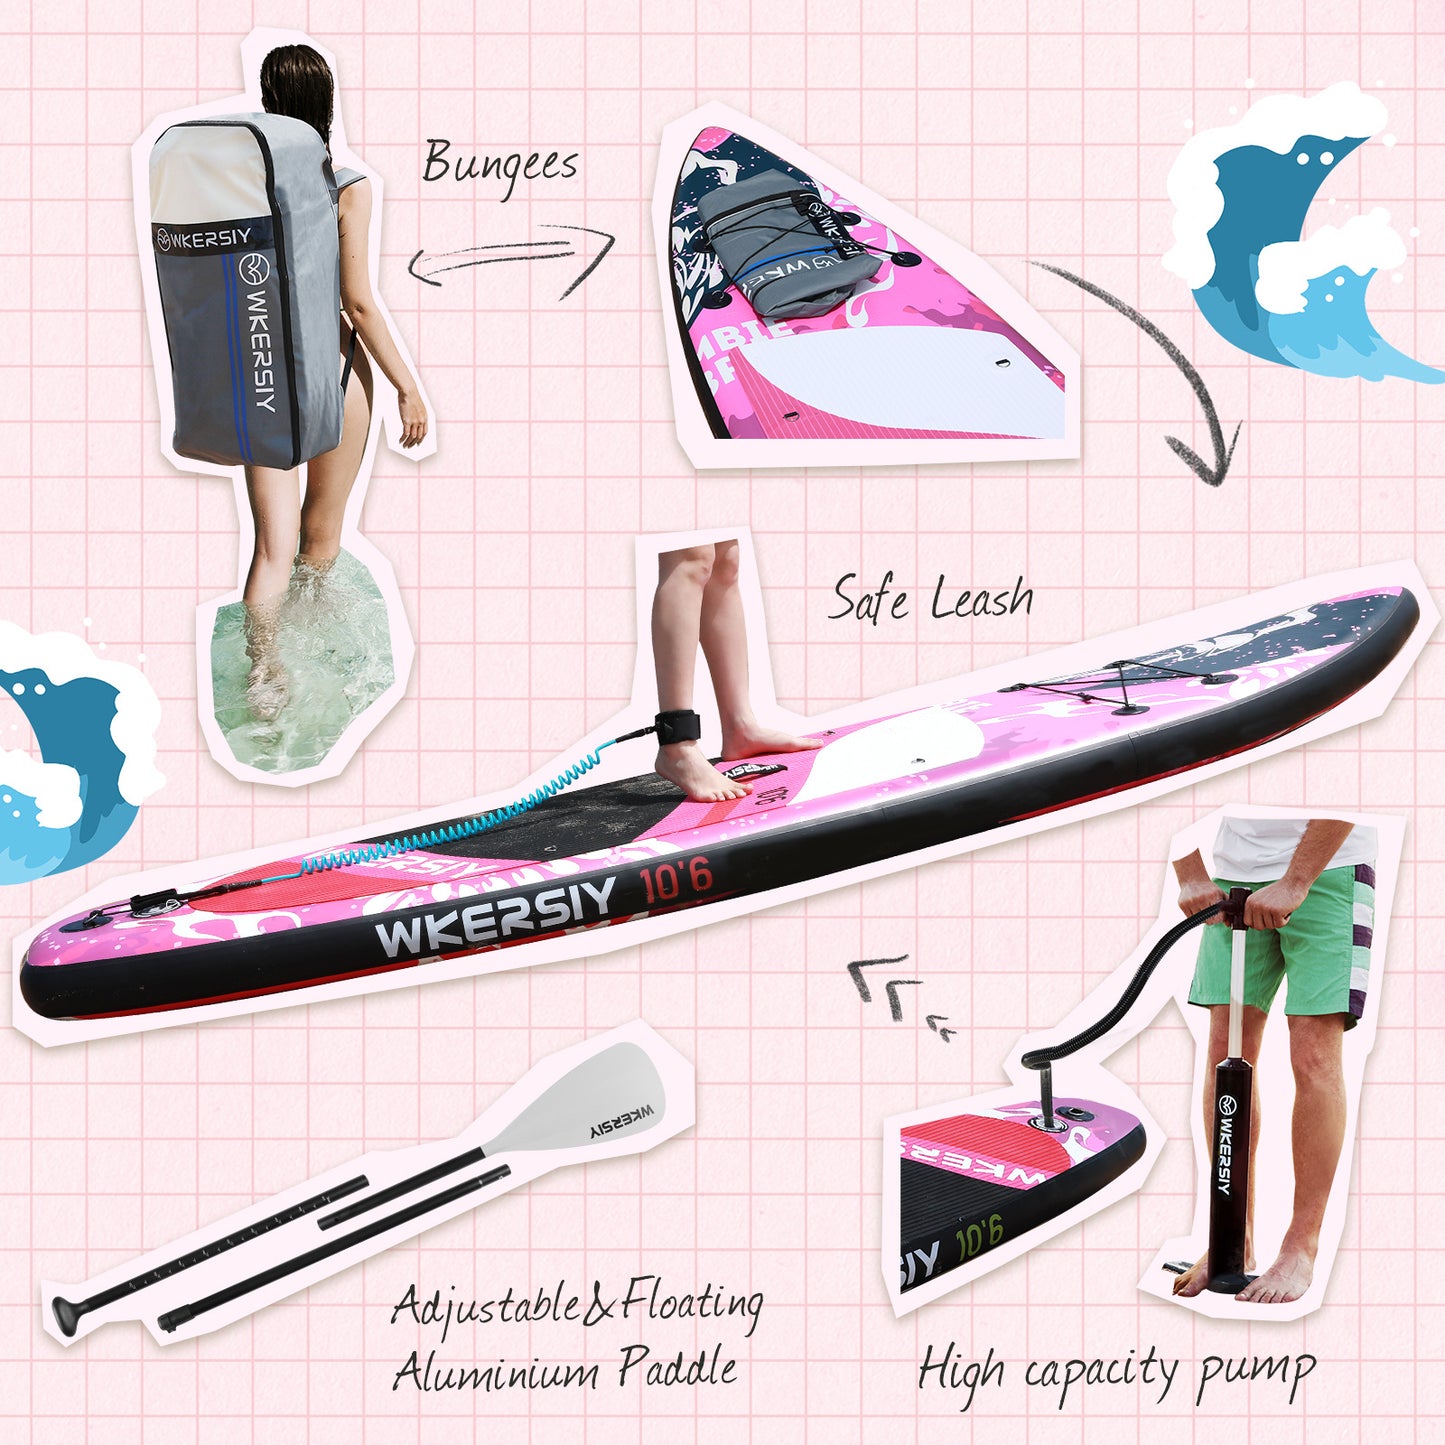 inflatable paddle board 10'6 including isup paddle, paddleboard backpack, pump, leash